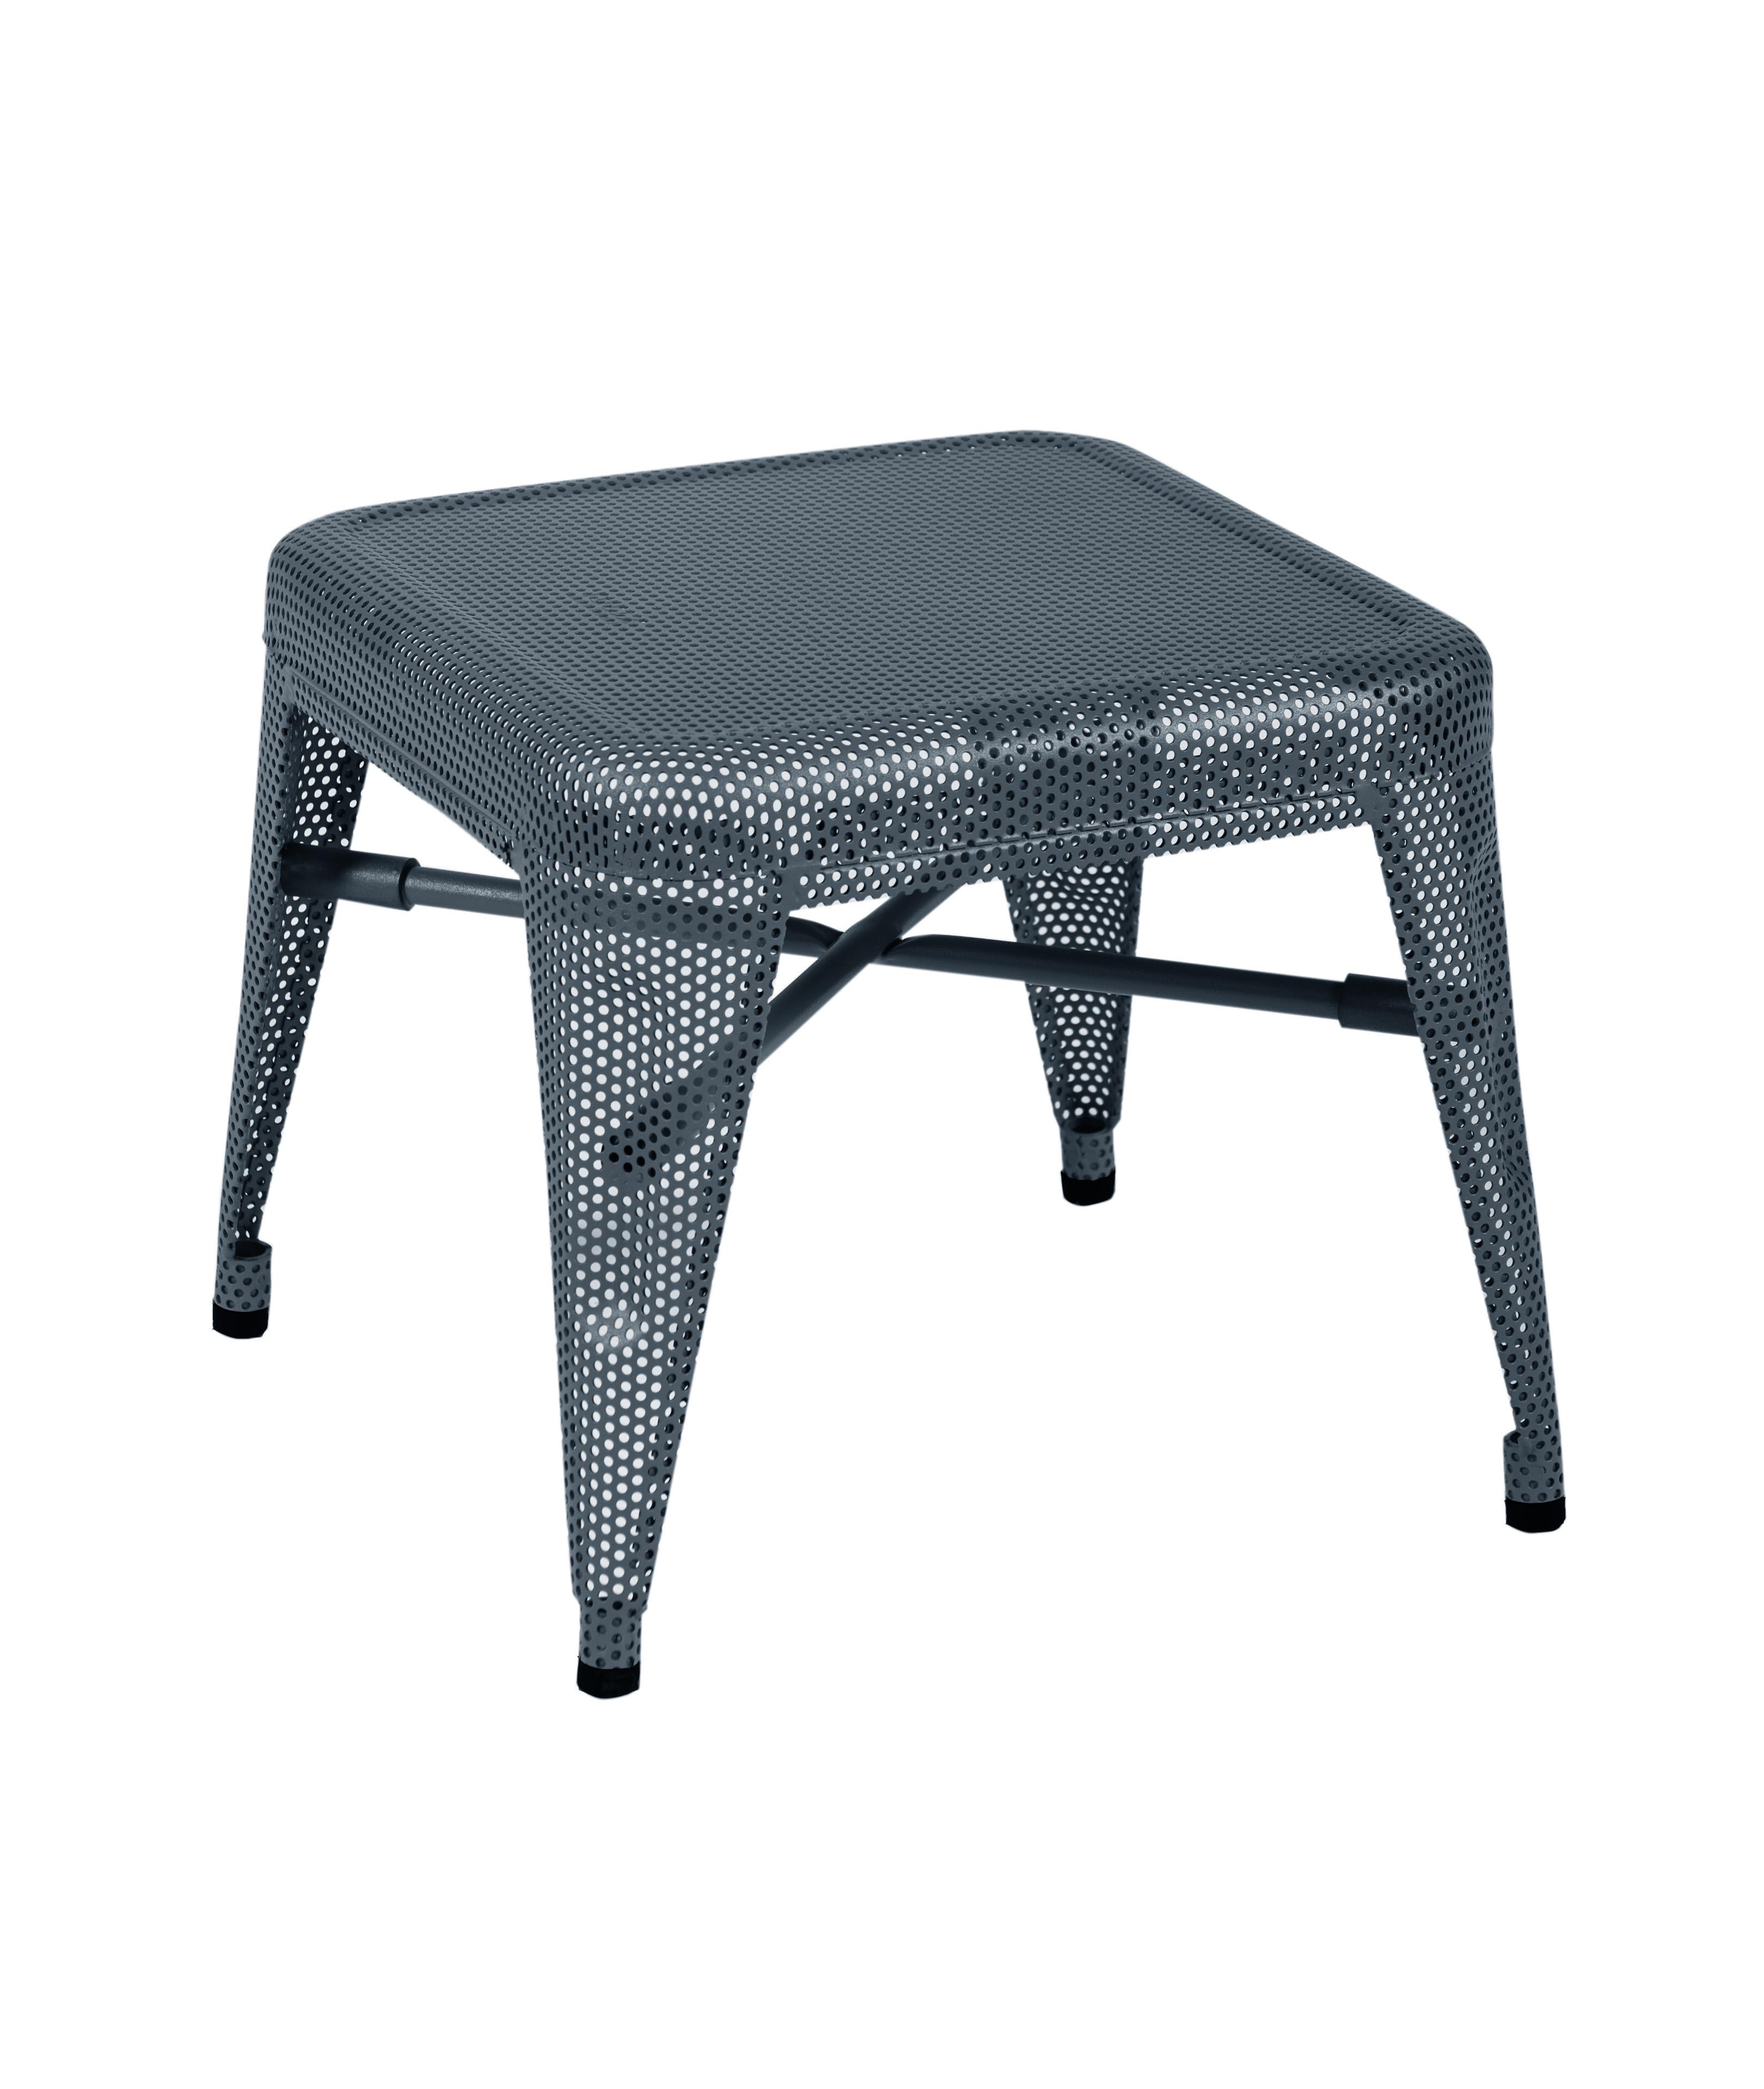 For Sale: Blue (Bleu Nuit) H30 Indoor Perforated Steel Stool in Pop Colors by Tolix